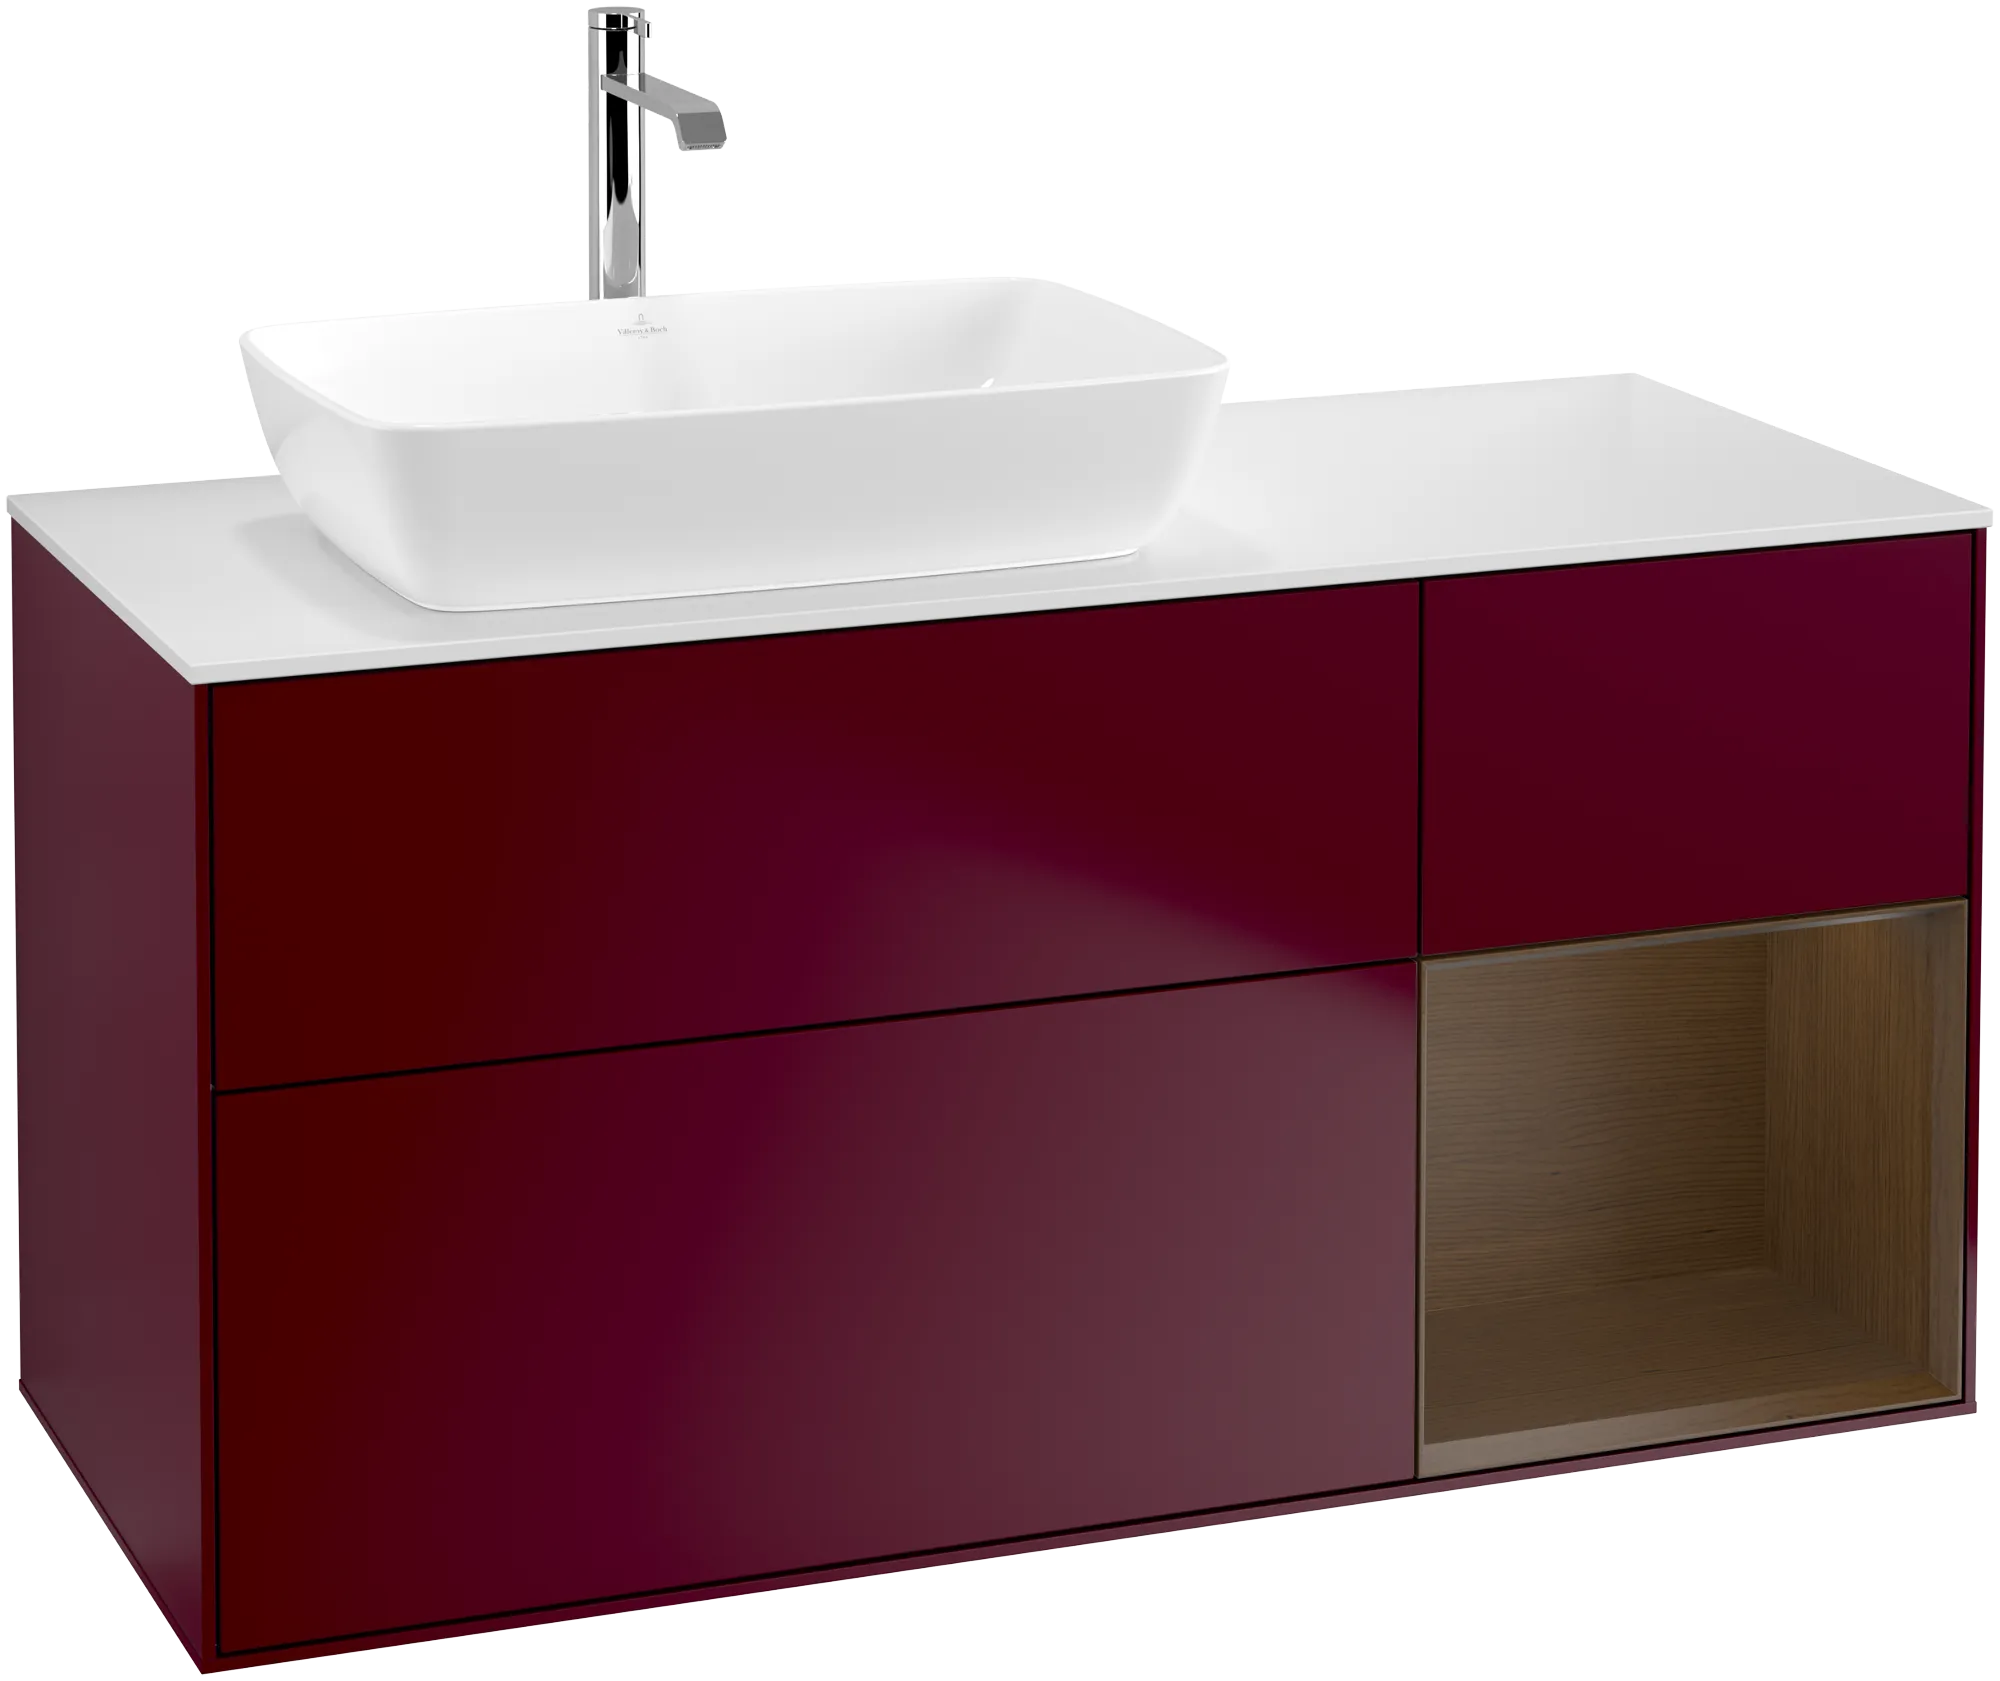 Picture of VILLEROY BOCH Finion Vanity unit, with lighting, 3 pull-out compartments, 1200 x 603 x 501 mm, Peony Matt Lacquer / Walnut Veneer / Glass White Matt #G811GNHB